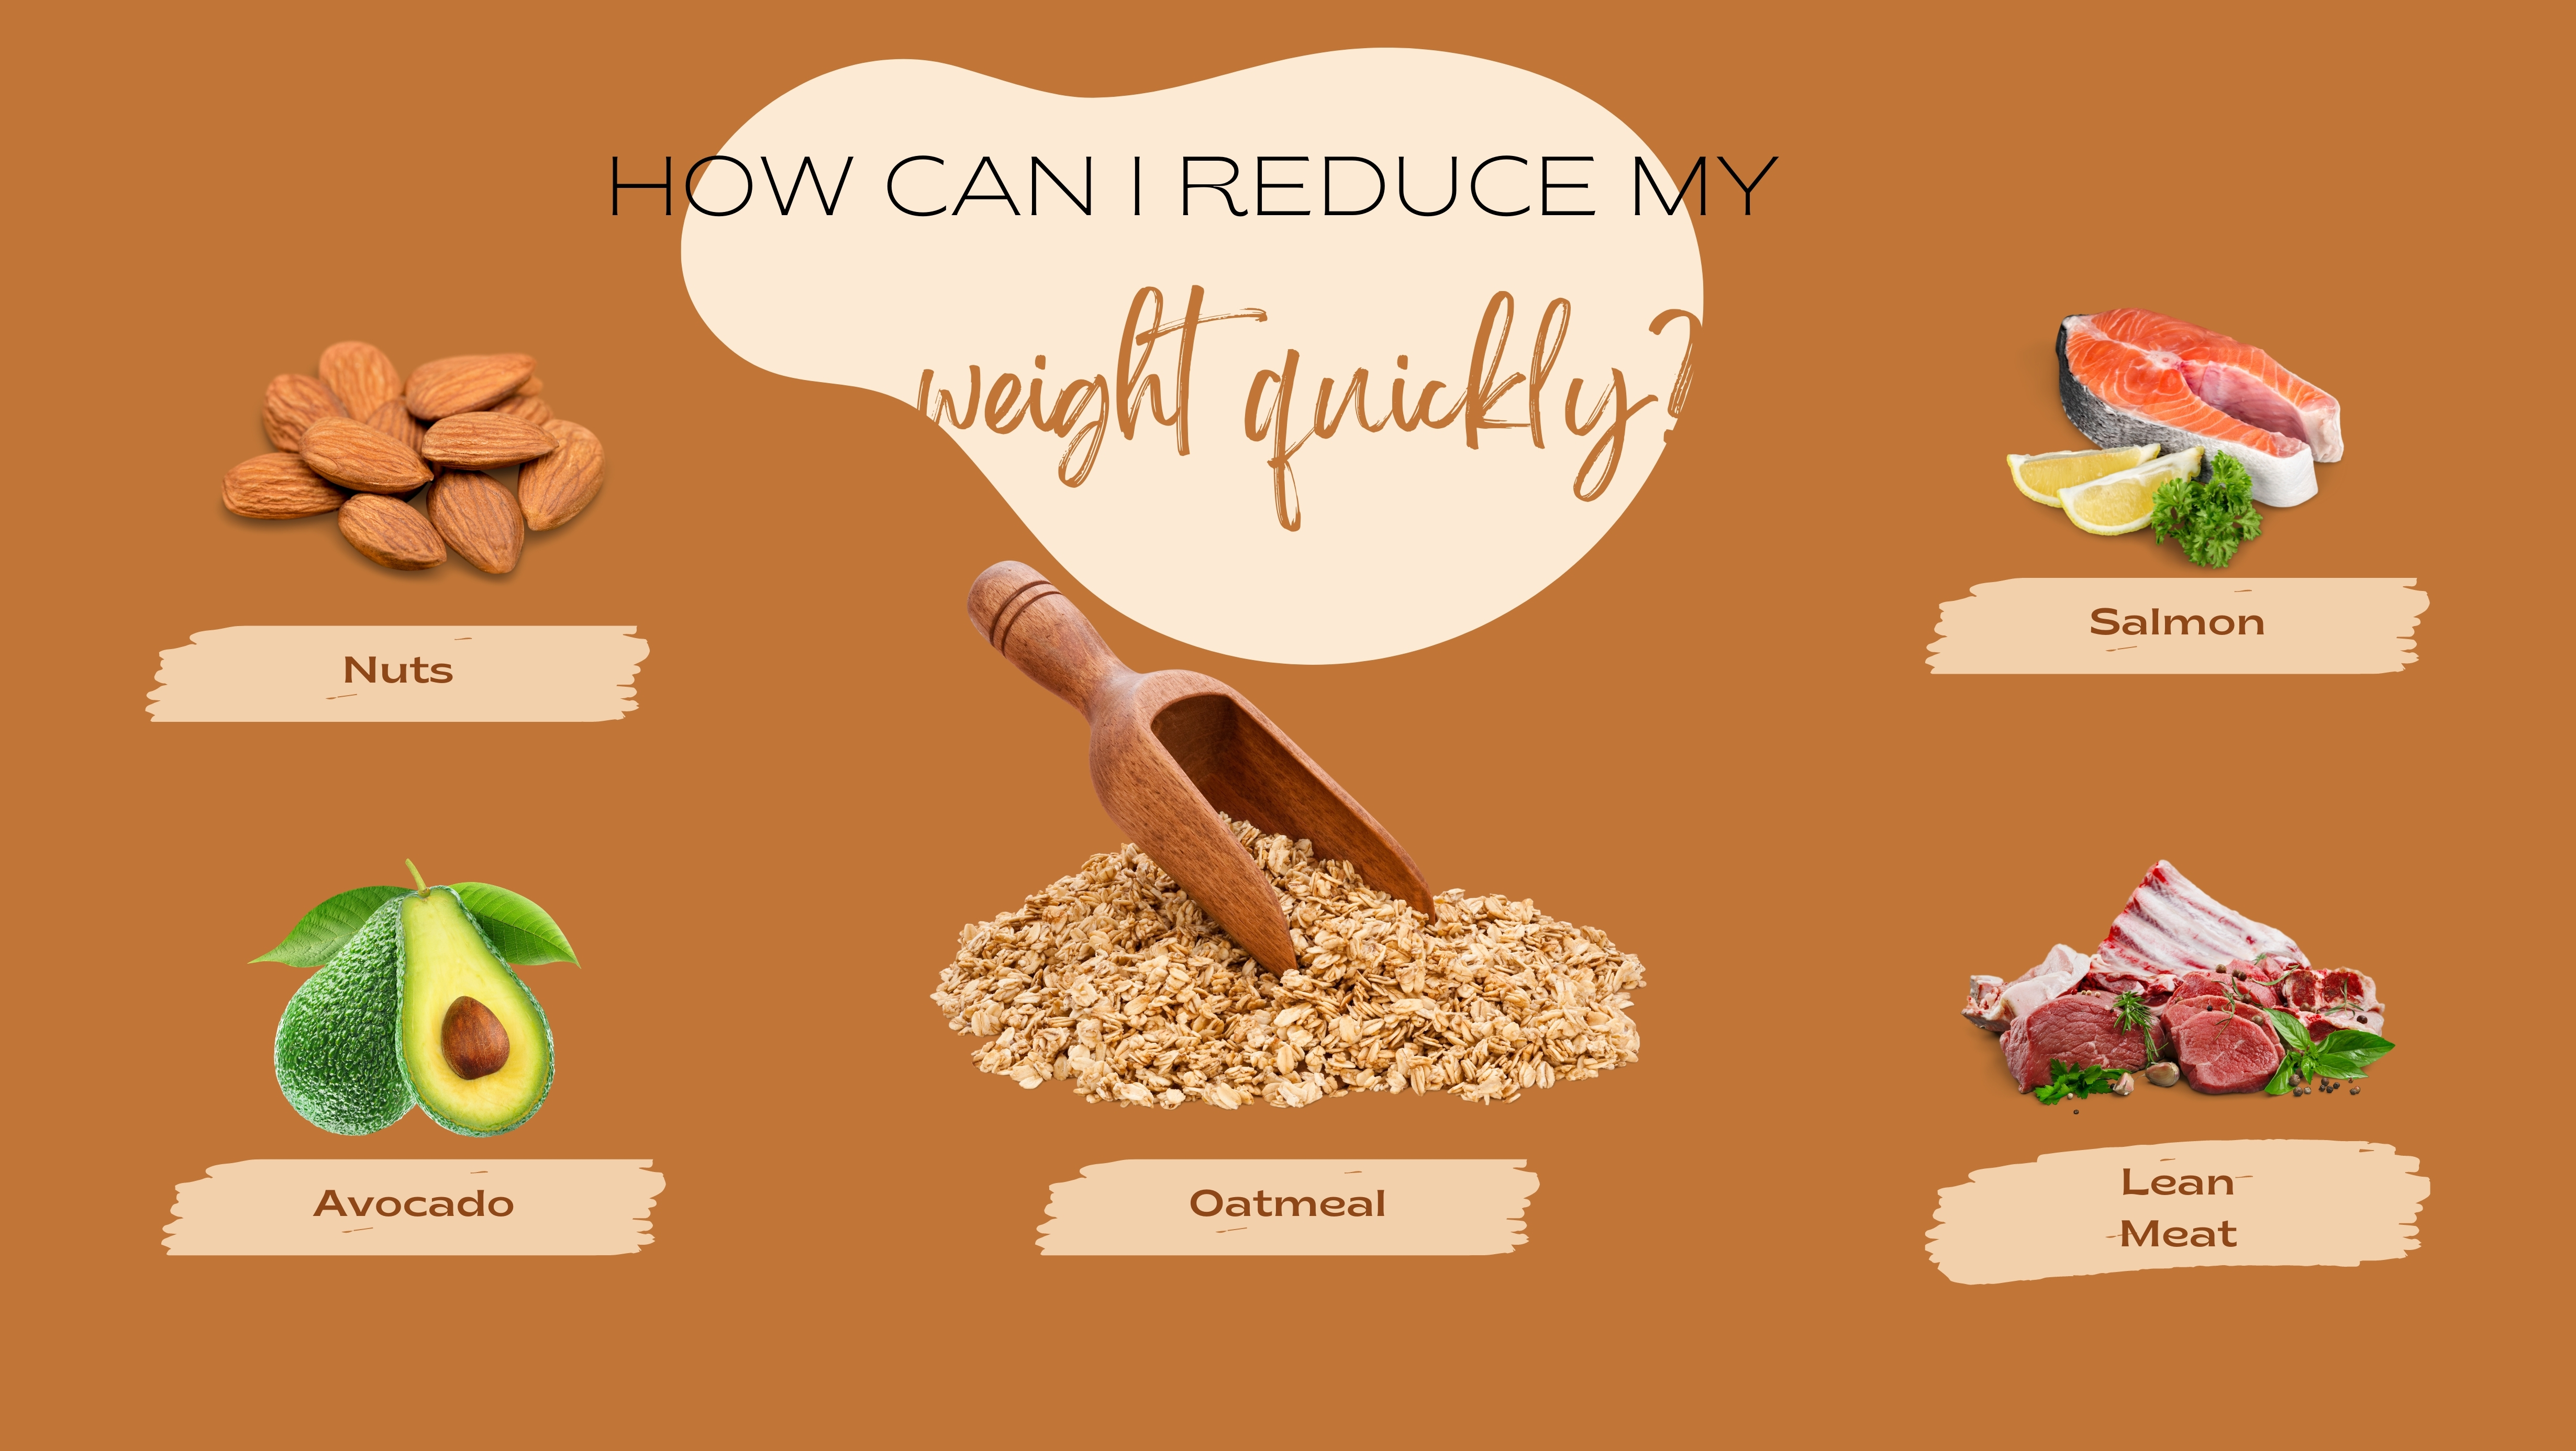 How can I reduce my weight quickly?